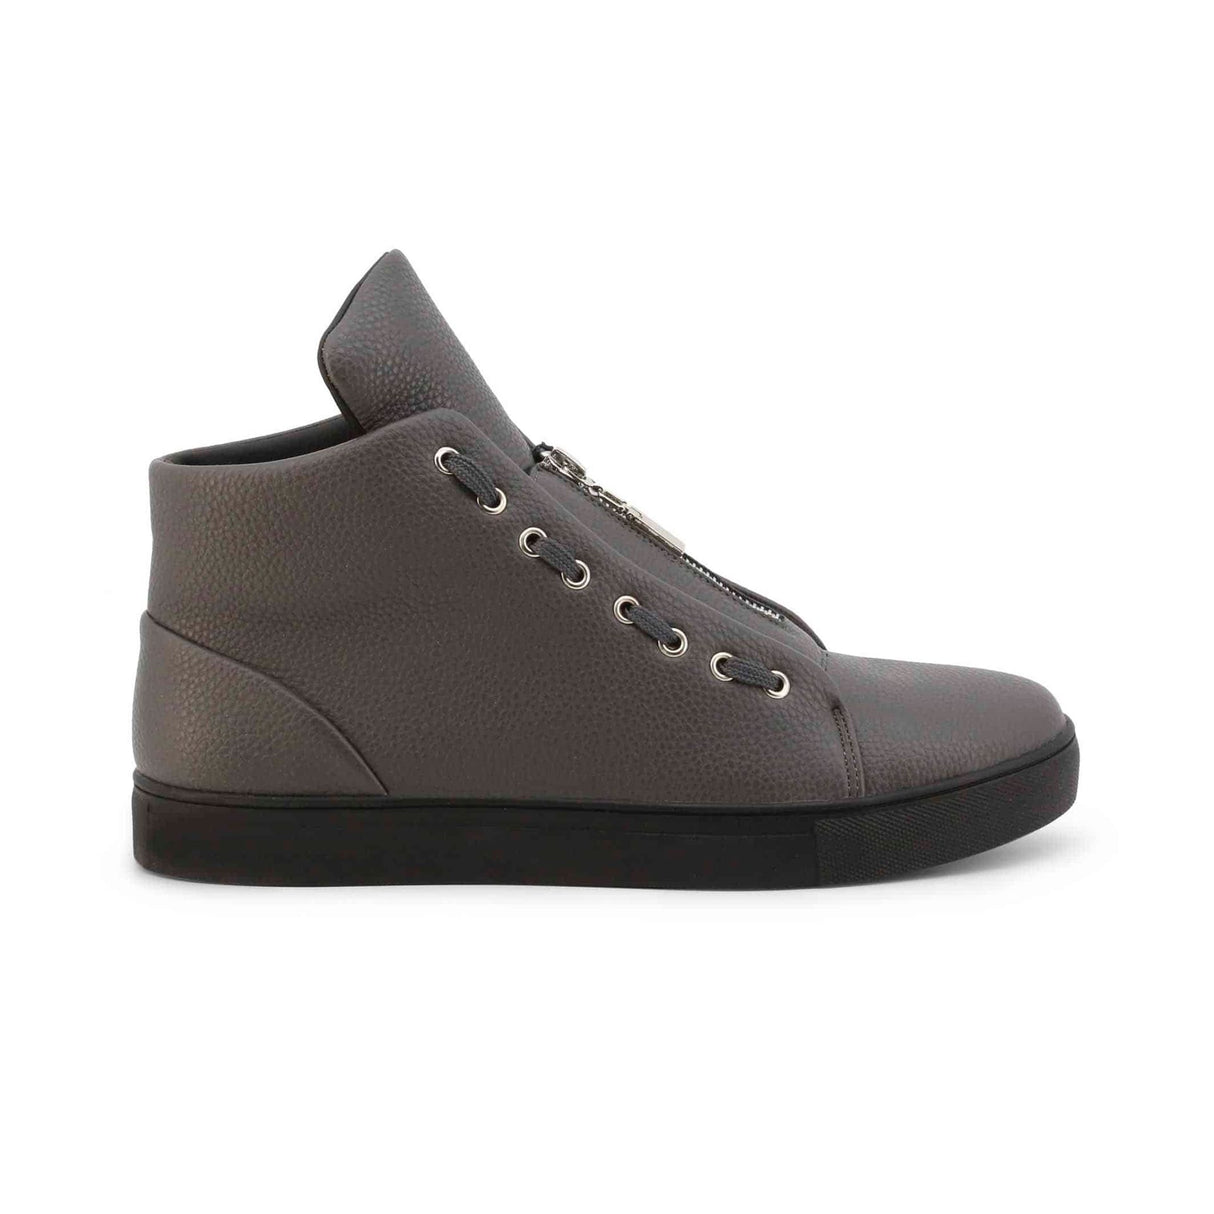 Duca Sneakers (men's) Synthetic leather upper Synthetic lining Rubber sole Metal eyelets Round toe Front zip closure Breathable comfort Durable construction Edgy details